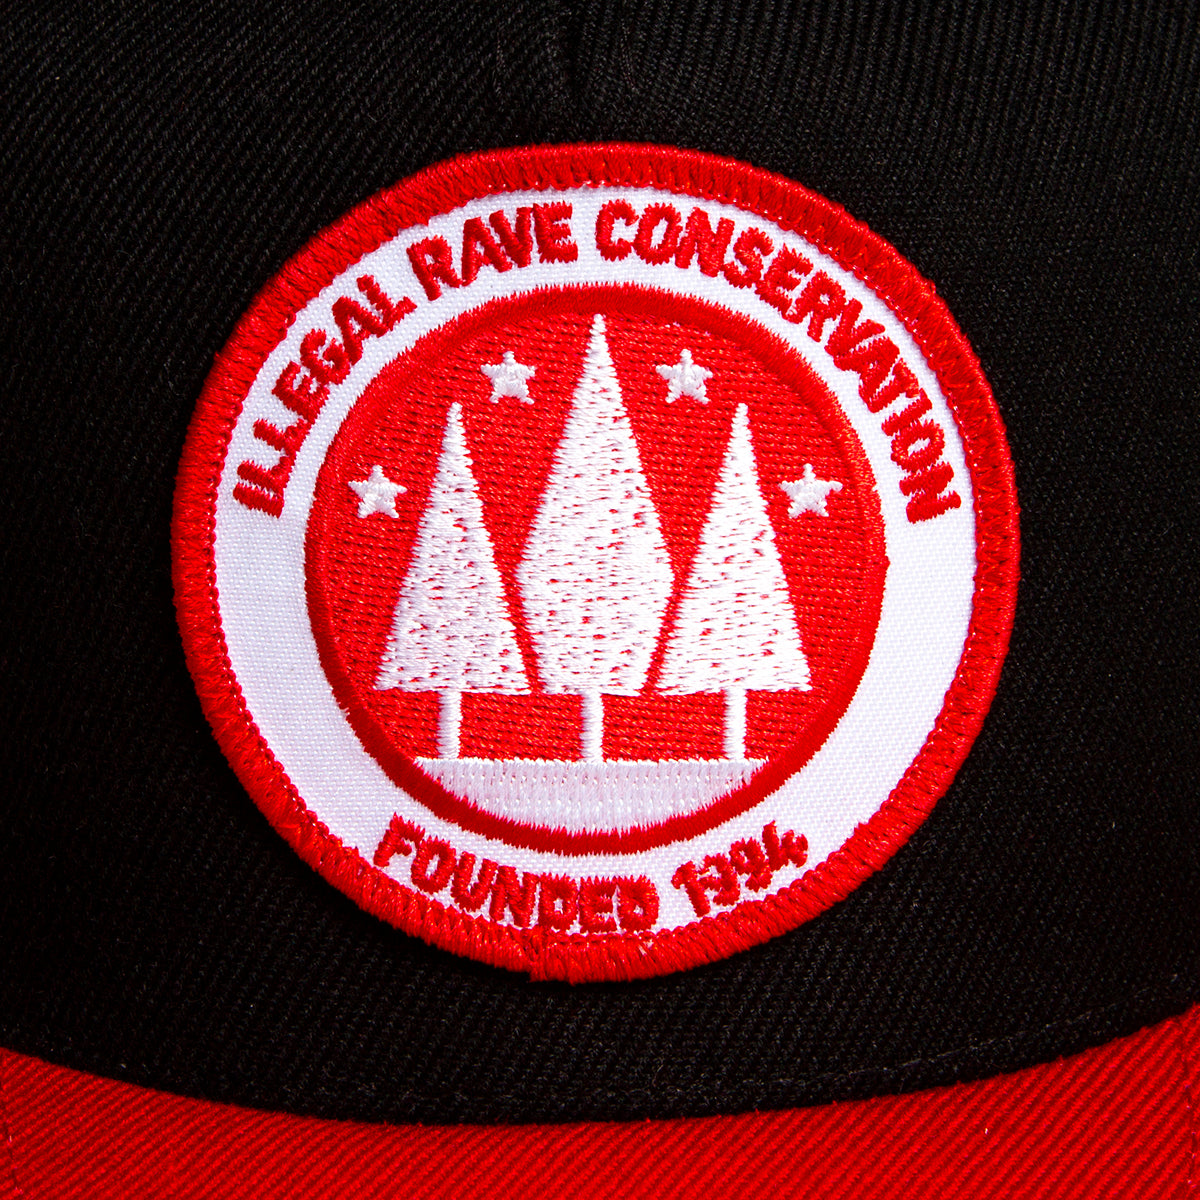 Illegal Rave - Snapback - Red & Black - Wasted Heroes